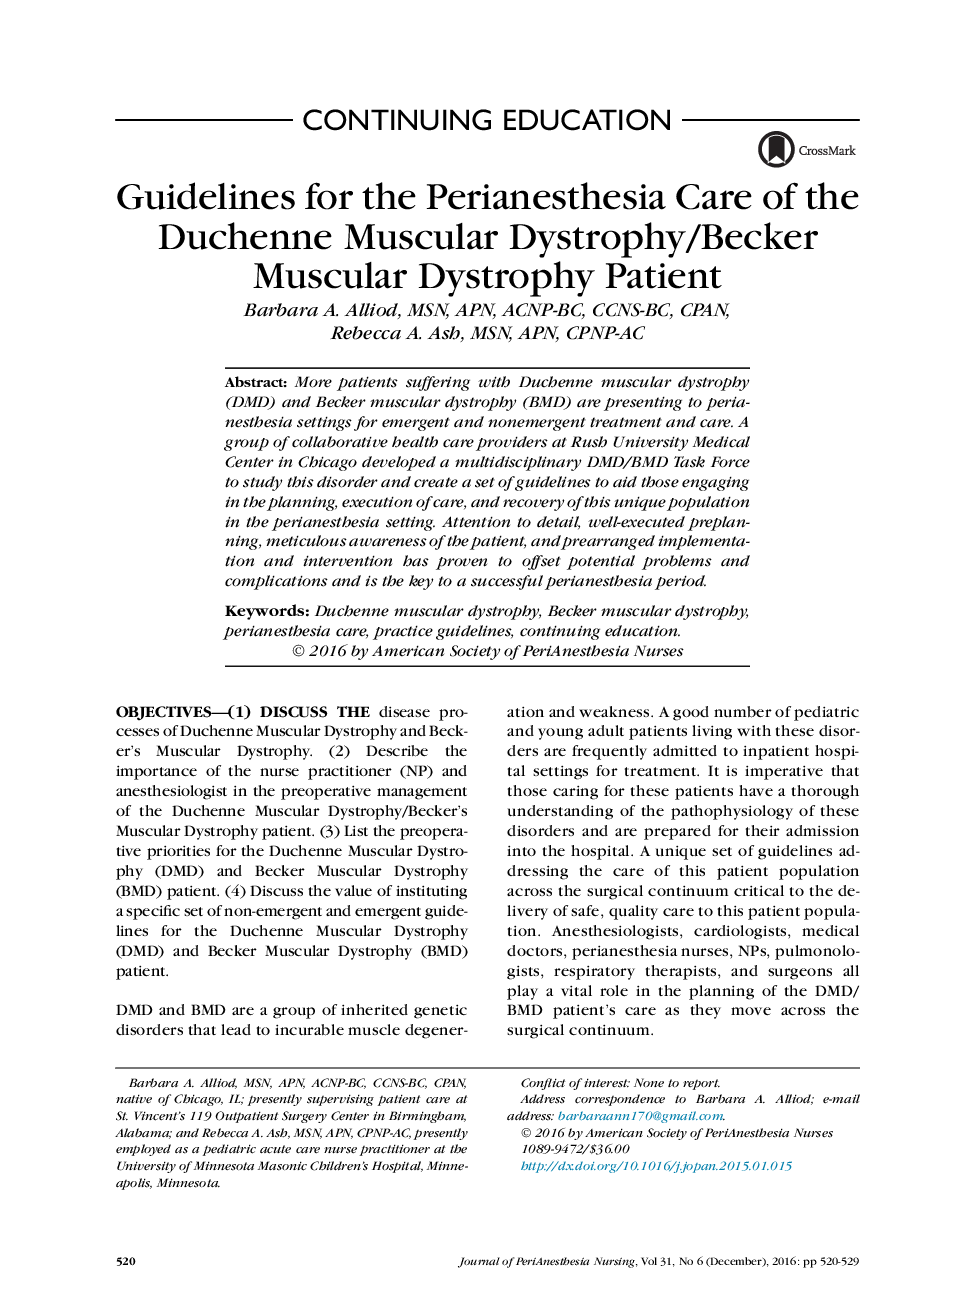 Guidelines for the Perianesthesia Care of the Duchenne Muscular Dystrophy/Becker Muscular Dystrophy Patient